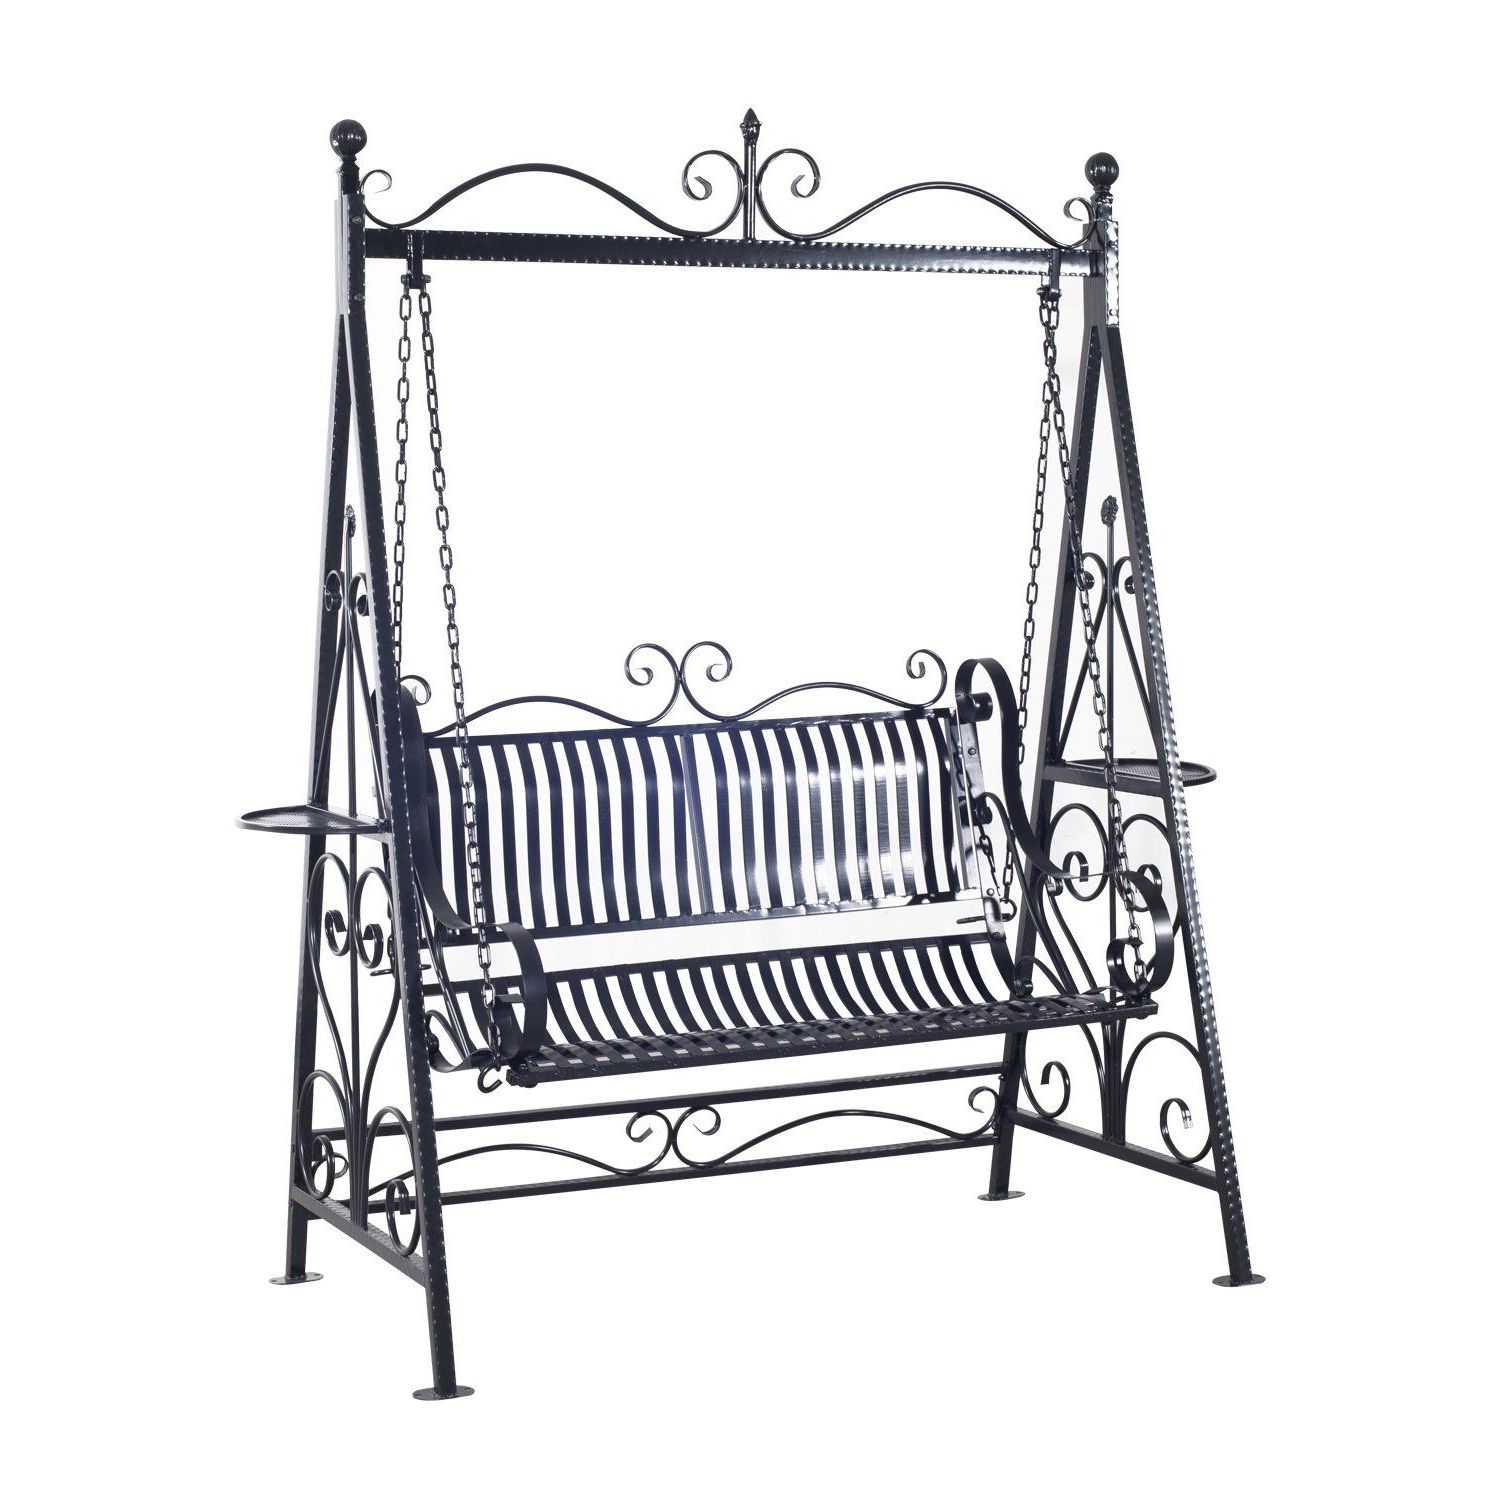 1 Person Antique Black Iron Outdoor Swings Throughout Most Up To Date Outsunny Garden Metal Swing Chair Outdoor Patio Hammock (View 1 of 25)